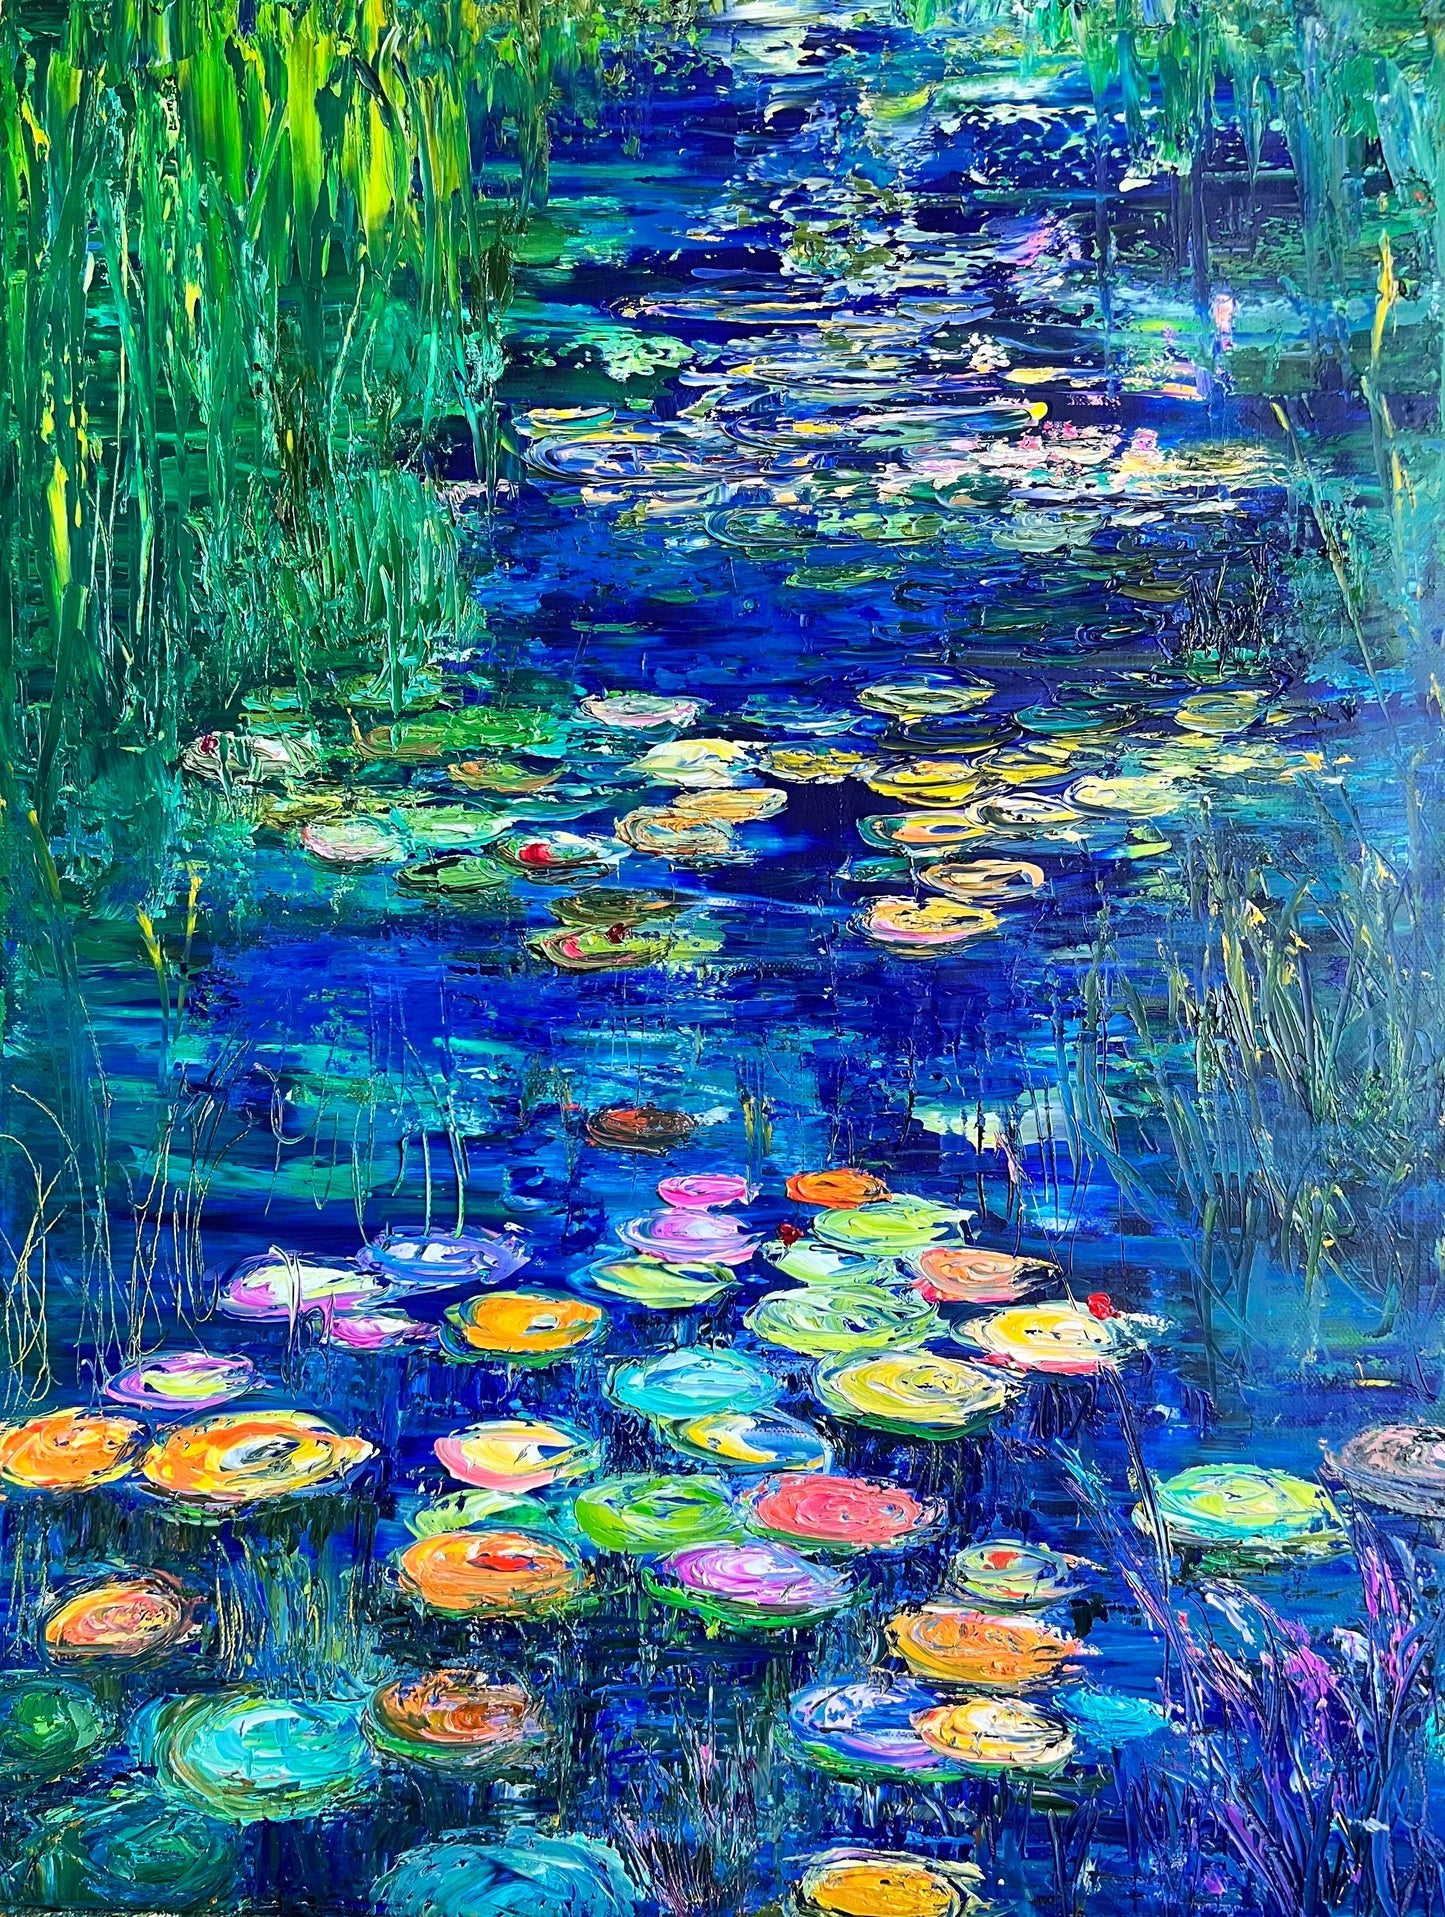 Blue Lily River: Abstract impressionist painting of water lilies on a river in lavender blue tones, inspired by Claude Monet